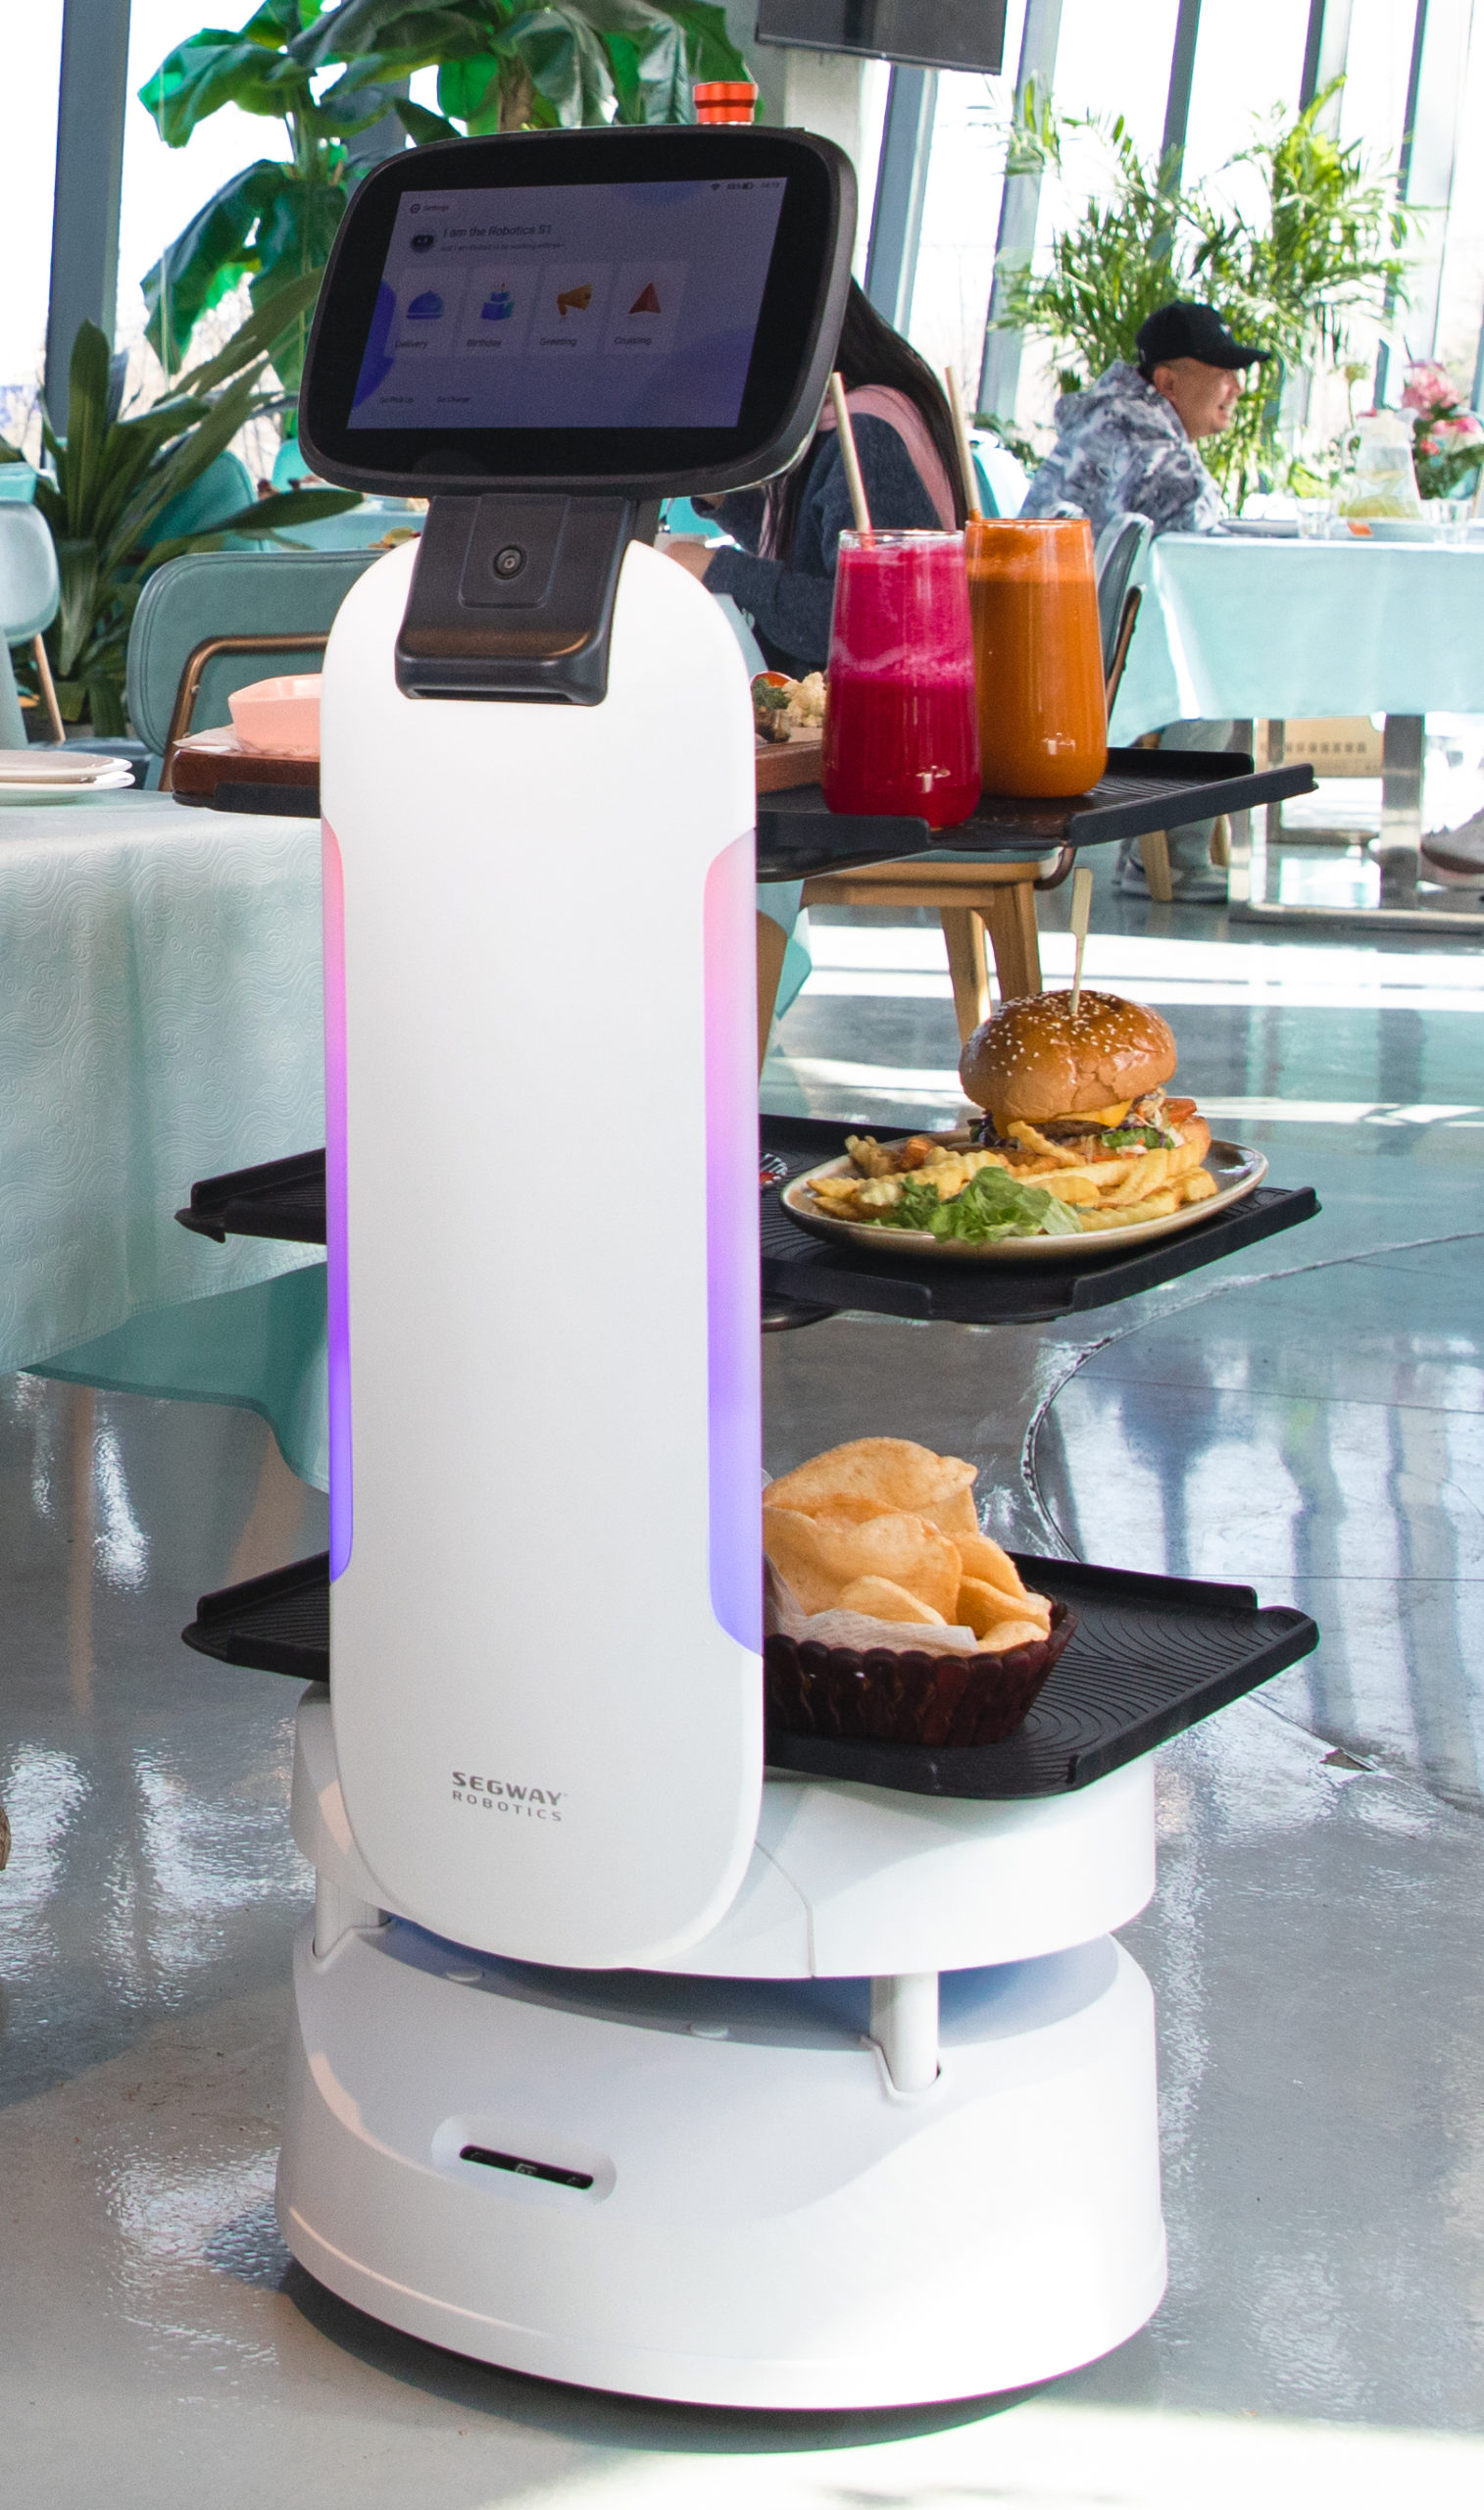 Segway Restaurant Service Robot more functions